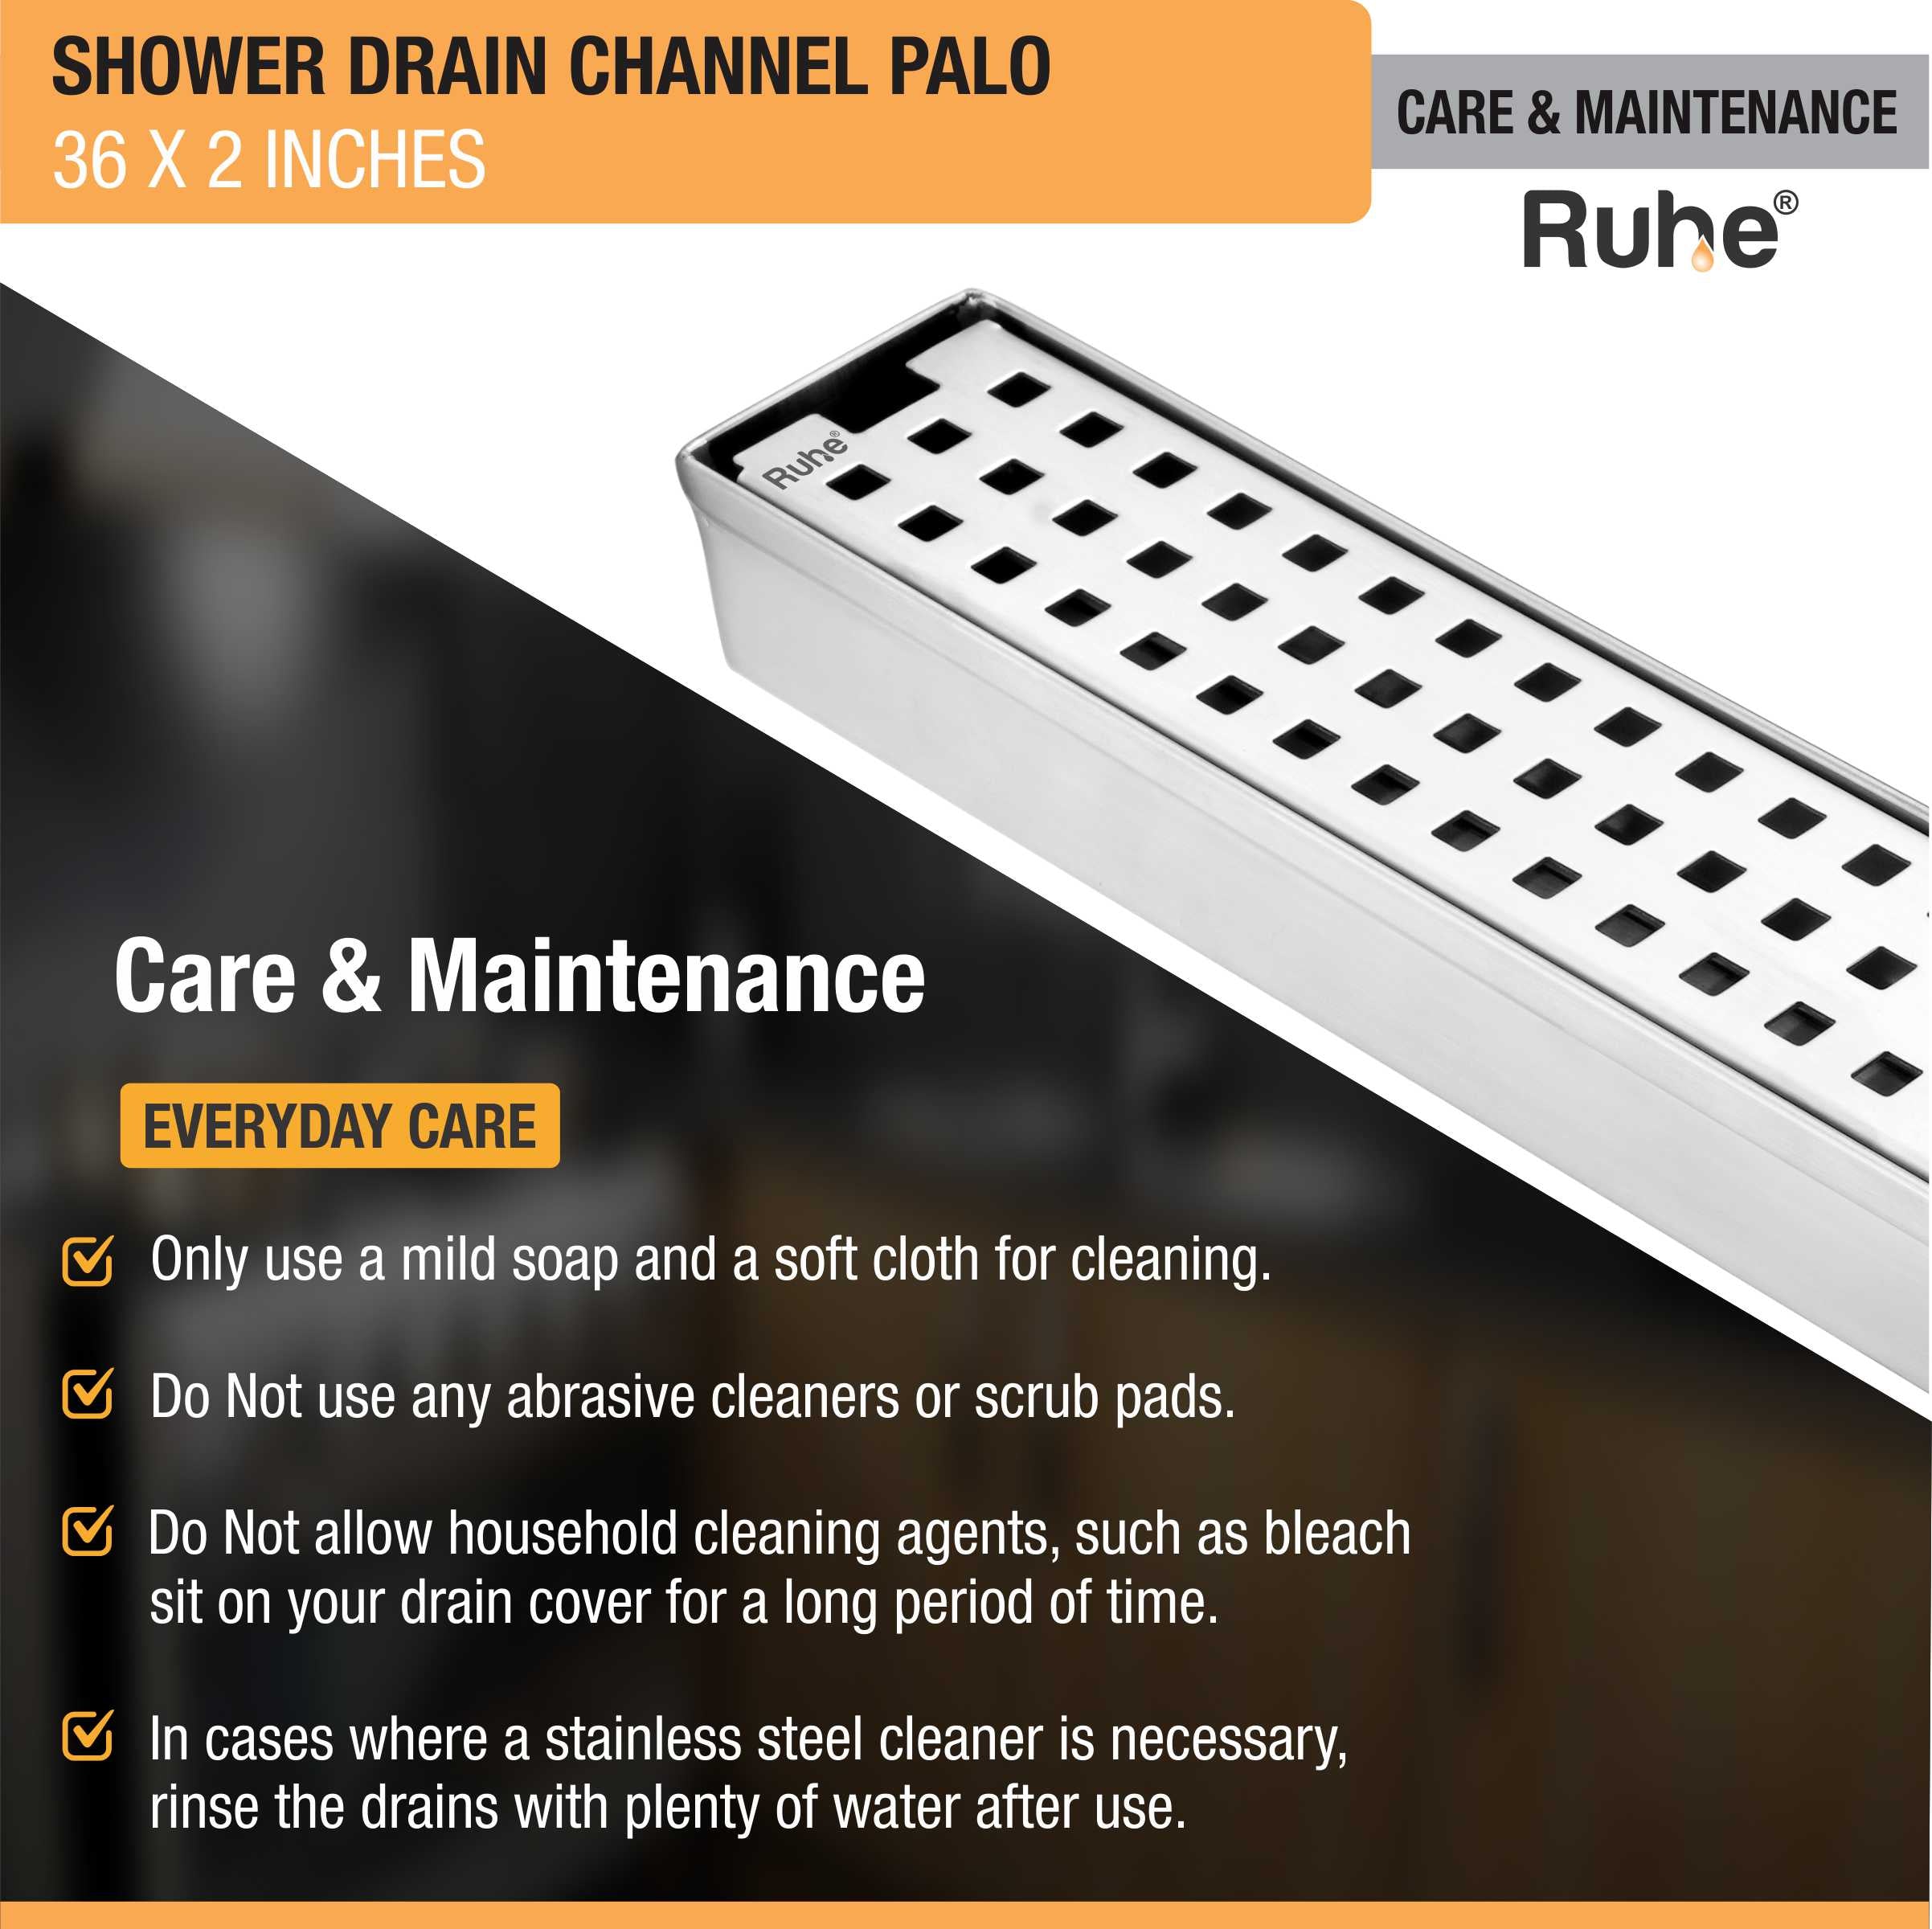 Palo Shower Drain Channel (36 X 2 Inches) (304 Grade) care and maintenance